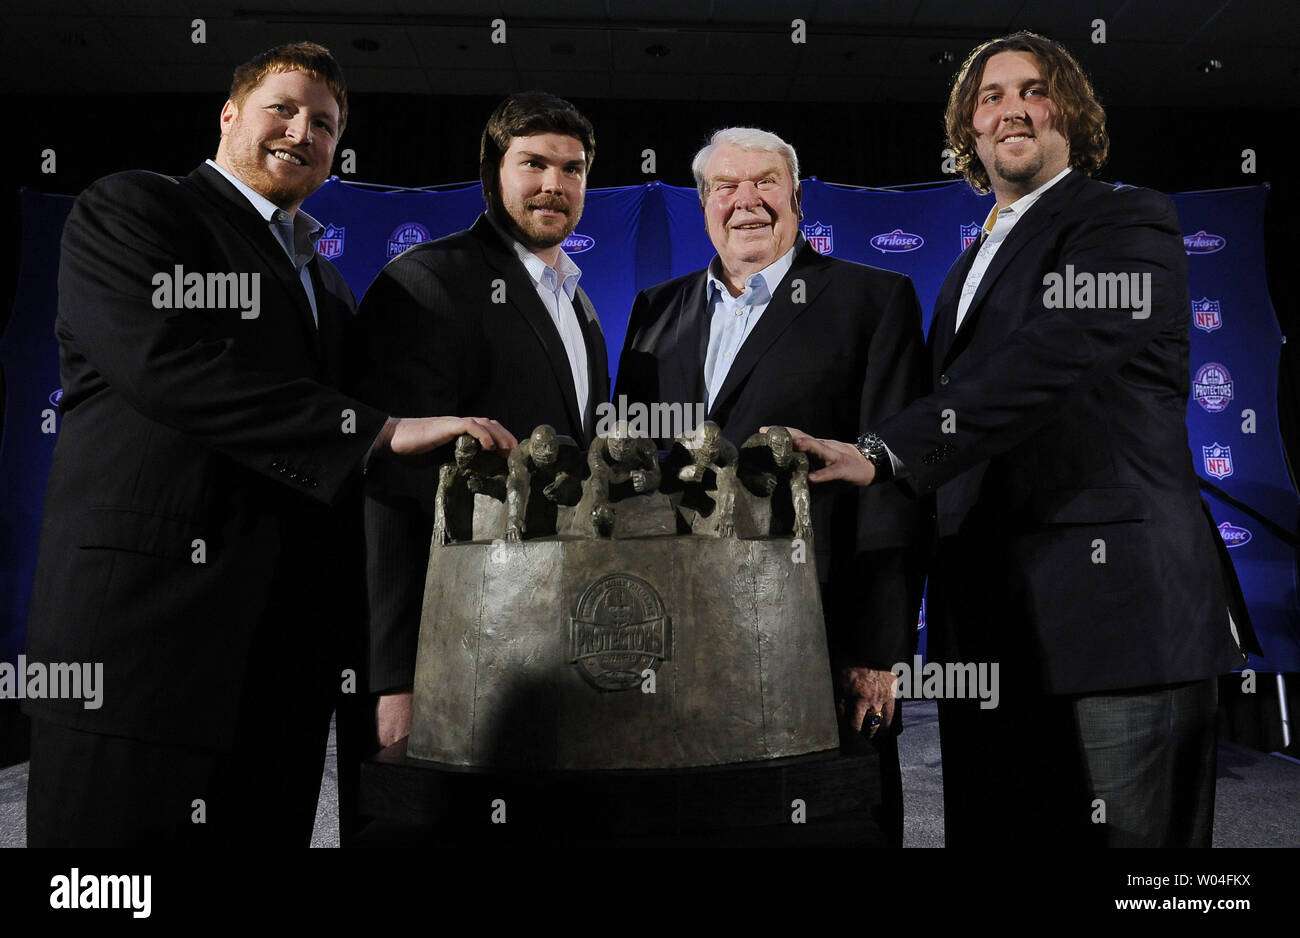 Dan Koppen (L), Dan Connolly (LC) and Mark LeVoir (R),  stand with John Madden (RC) and the award after the New England Patriots won the Madden Most Valuable Protectors Award as the year's best offensive line during the week of Super Bowl XLV in Dallas, Texas, on February 3, 2011. The Pittsburgh Steelers will take on the Green Bay Packers on February 6, 2011.    UPI/Roger L. Wollenberg Stock Photo